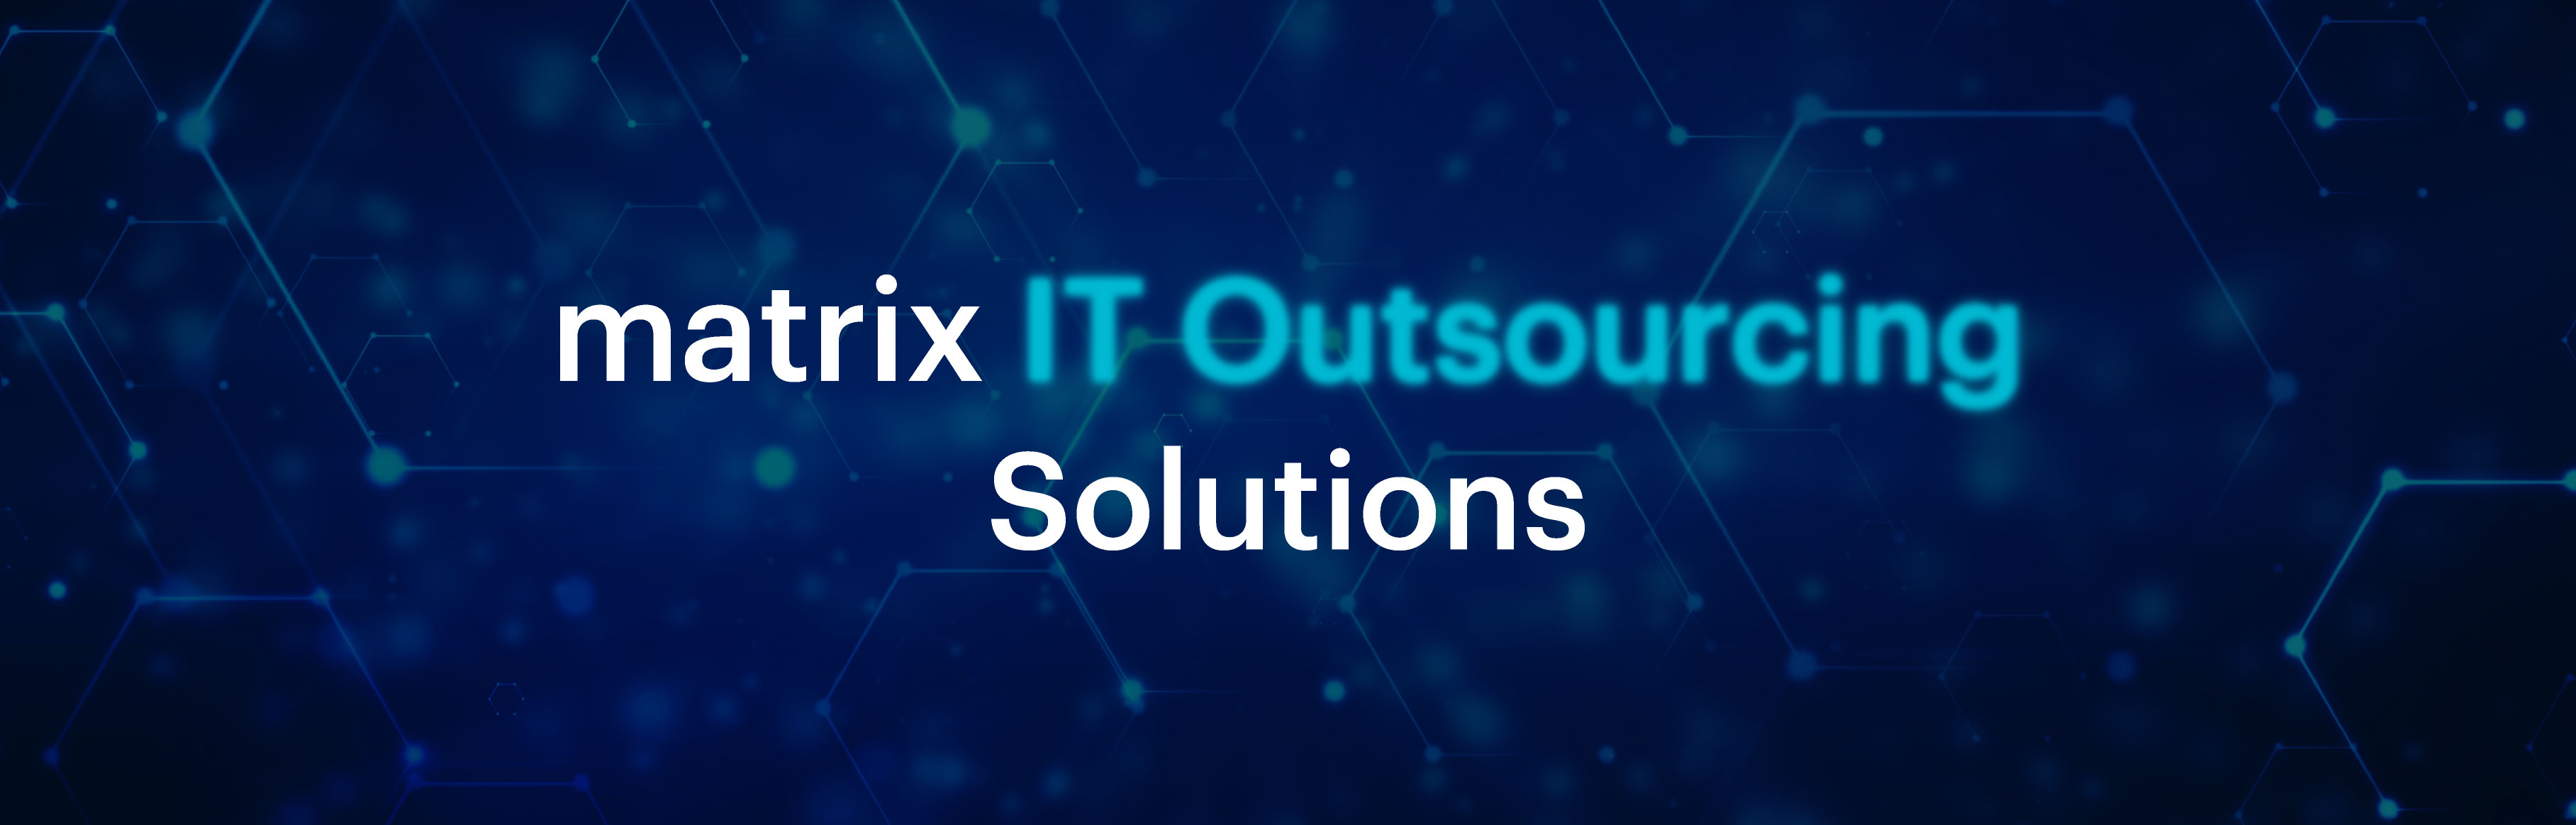 matrix IT Outsourcing Solutions